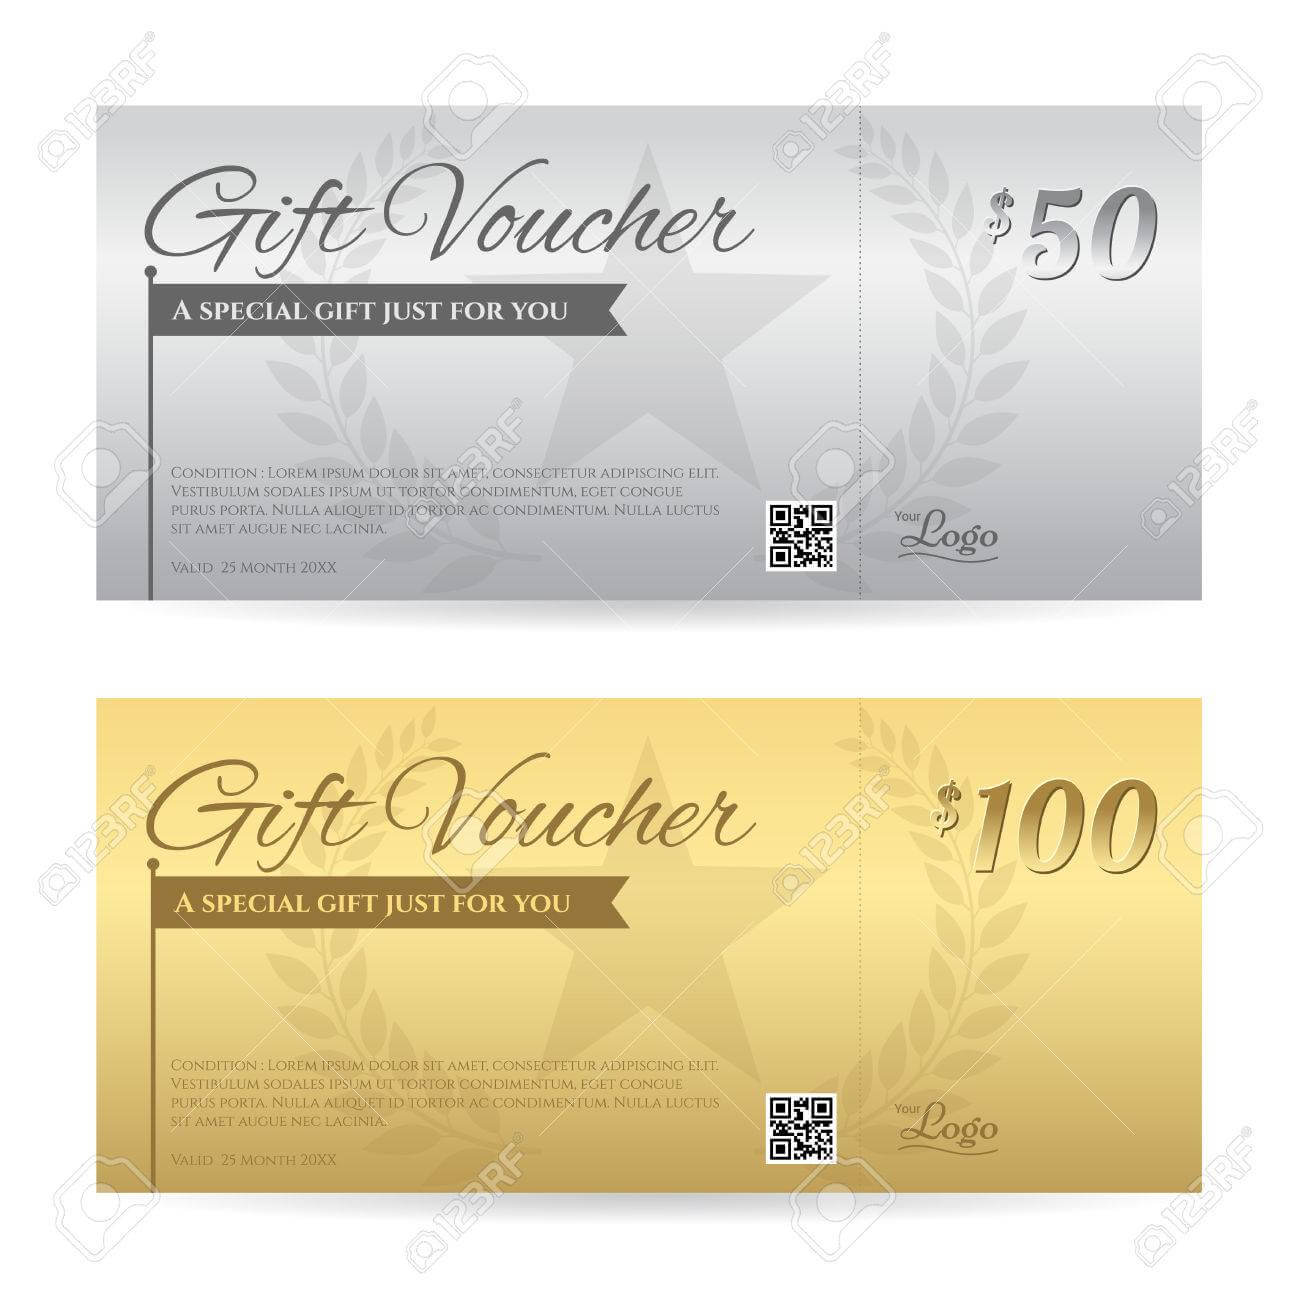 Elegant Gift Voucher Or Gift Card Certificate Template In Gold.. Pertaining To Elegant Gift Certificate Template